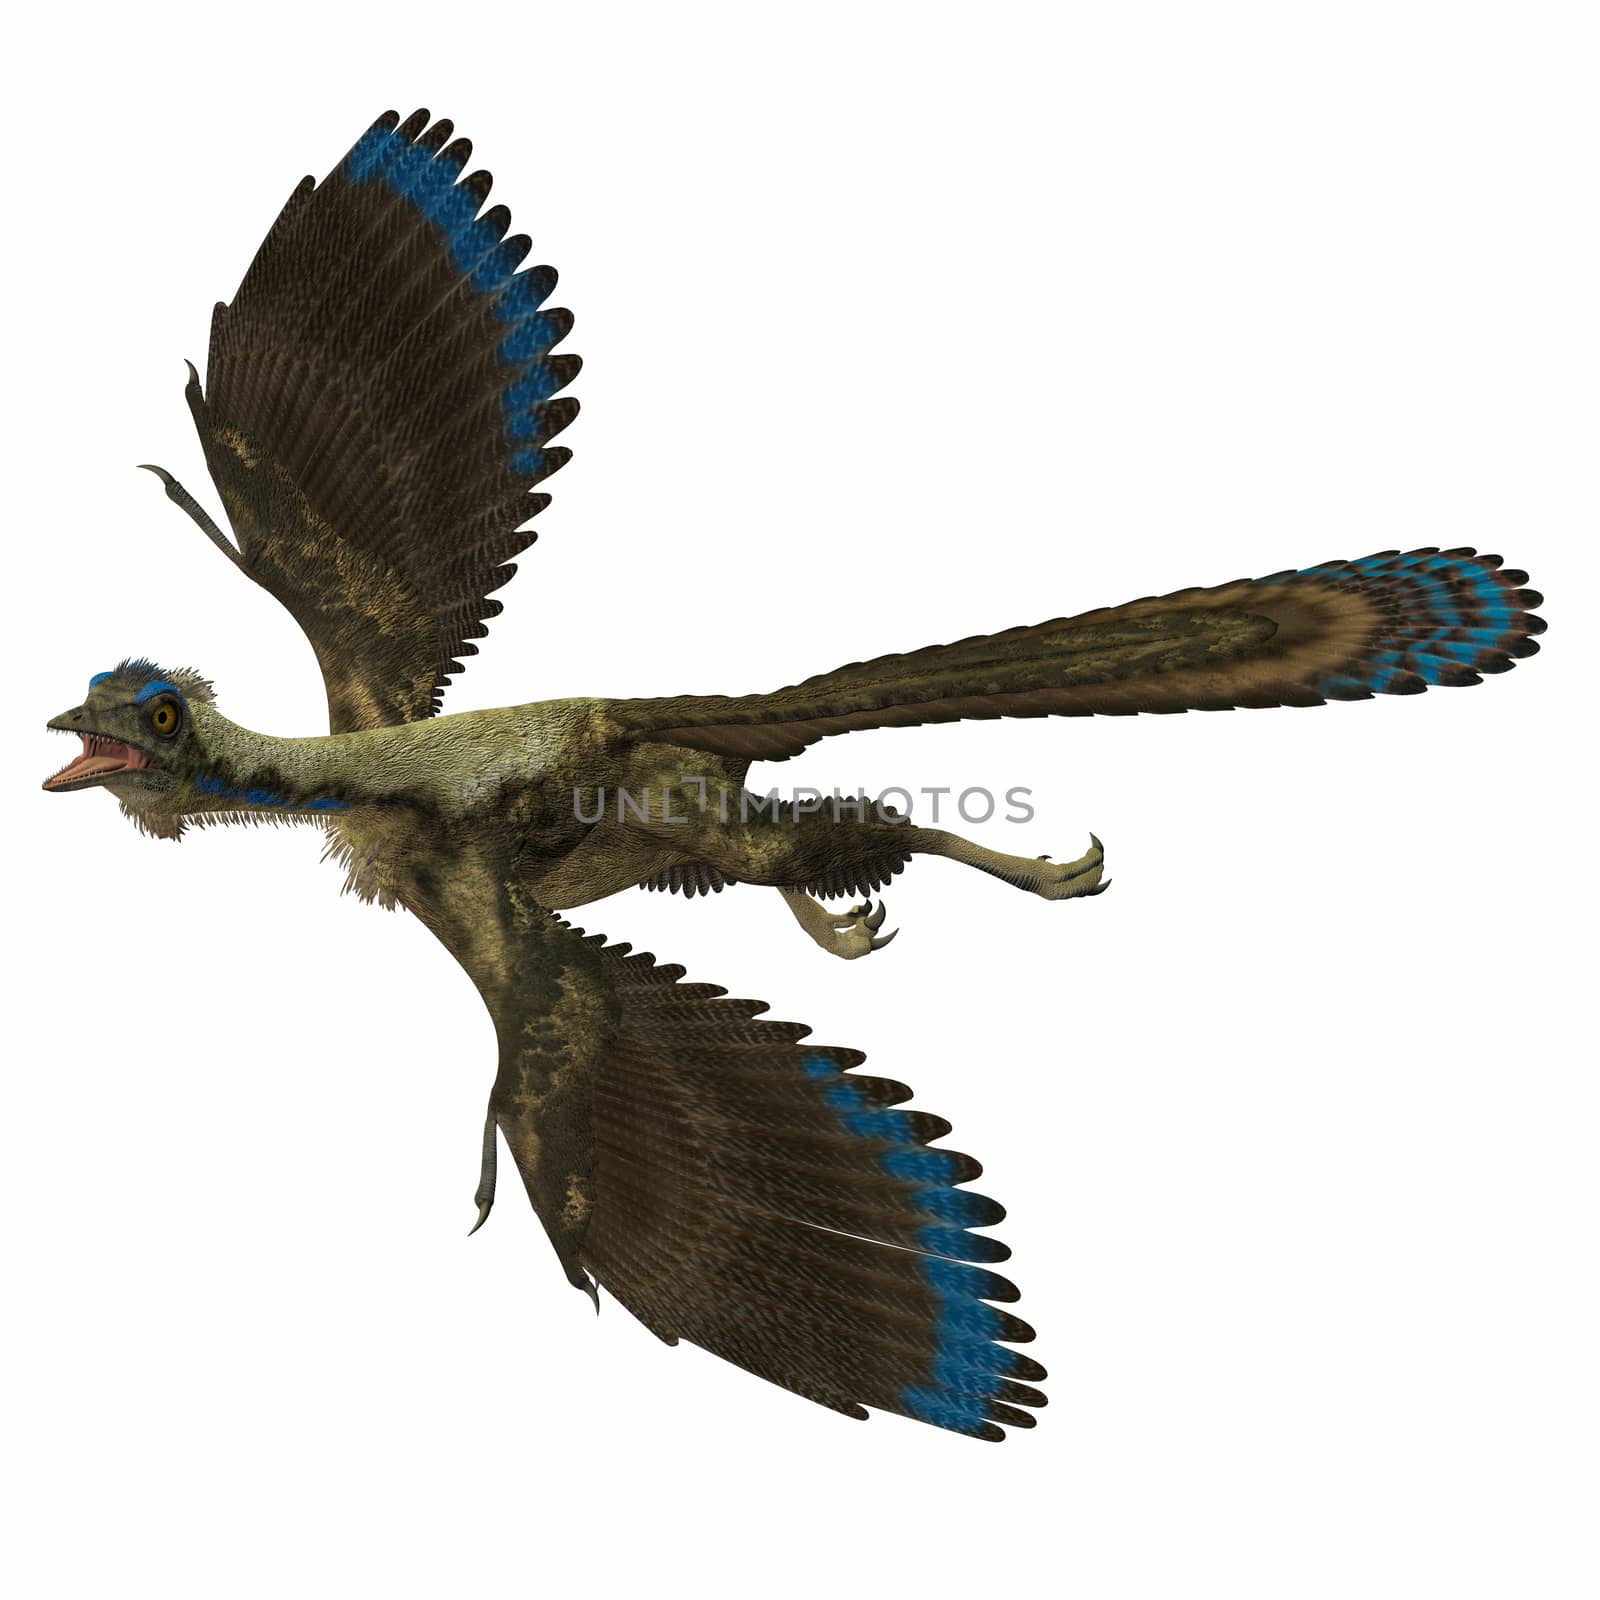 Archaeopteryx is the most primitive known bird and lived in the Jurassic Age of Germany.